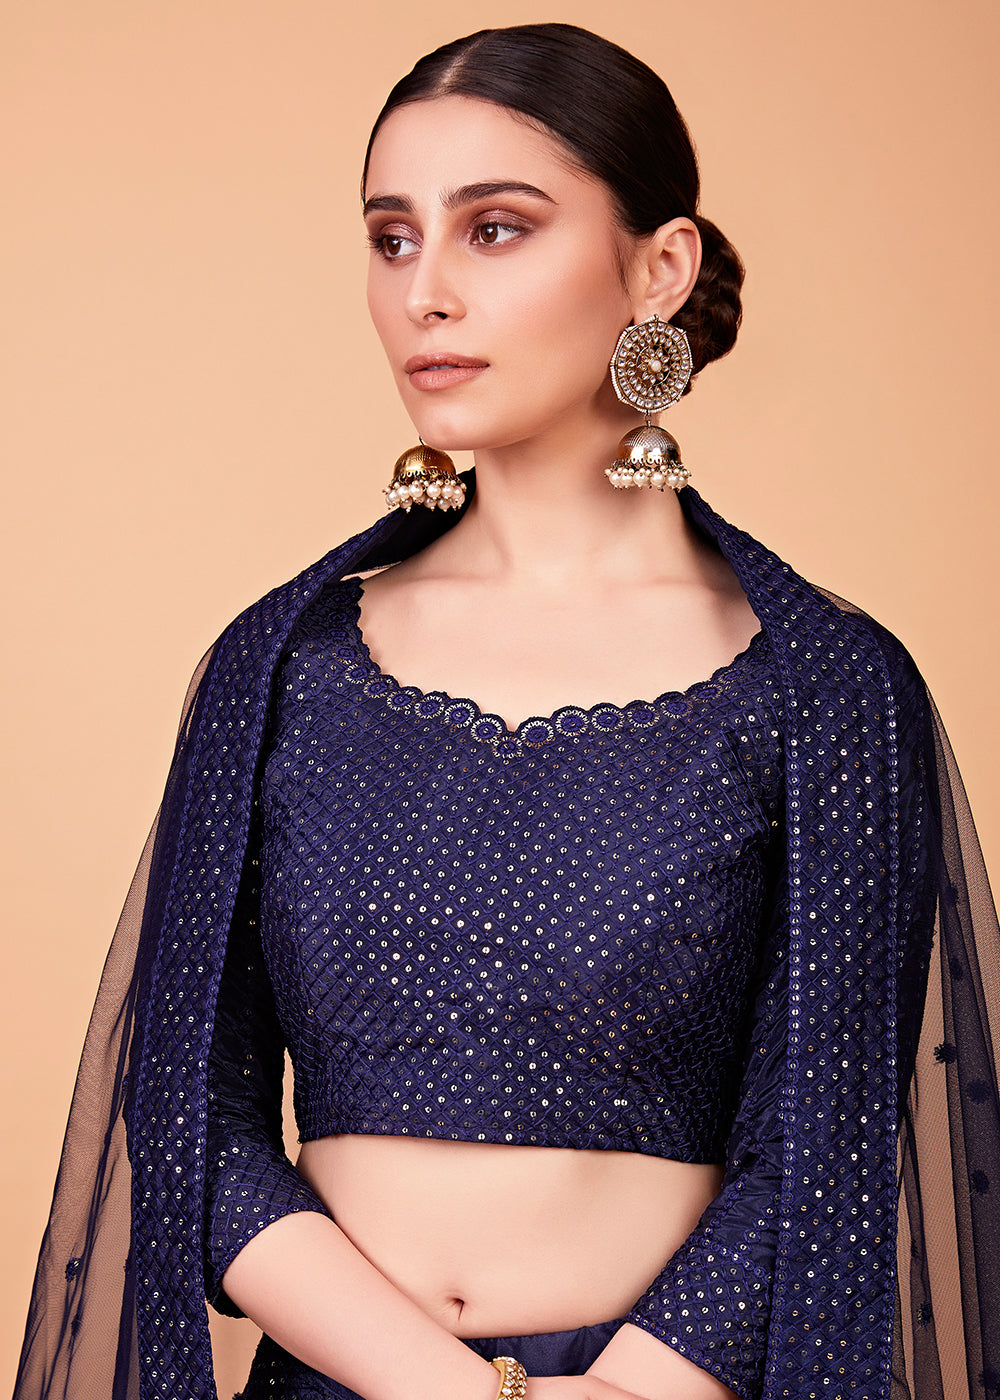 Buy Now Dazzling Navy Blue Multi Thread & Sequins Party Wear Lehenga Choli Online in USA, UK, Canada & Worldwide at Empress Clothing.